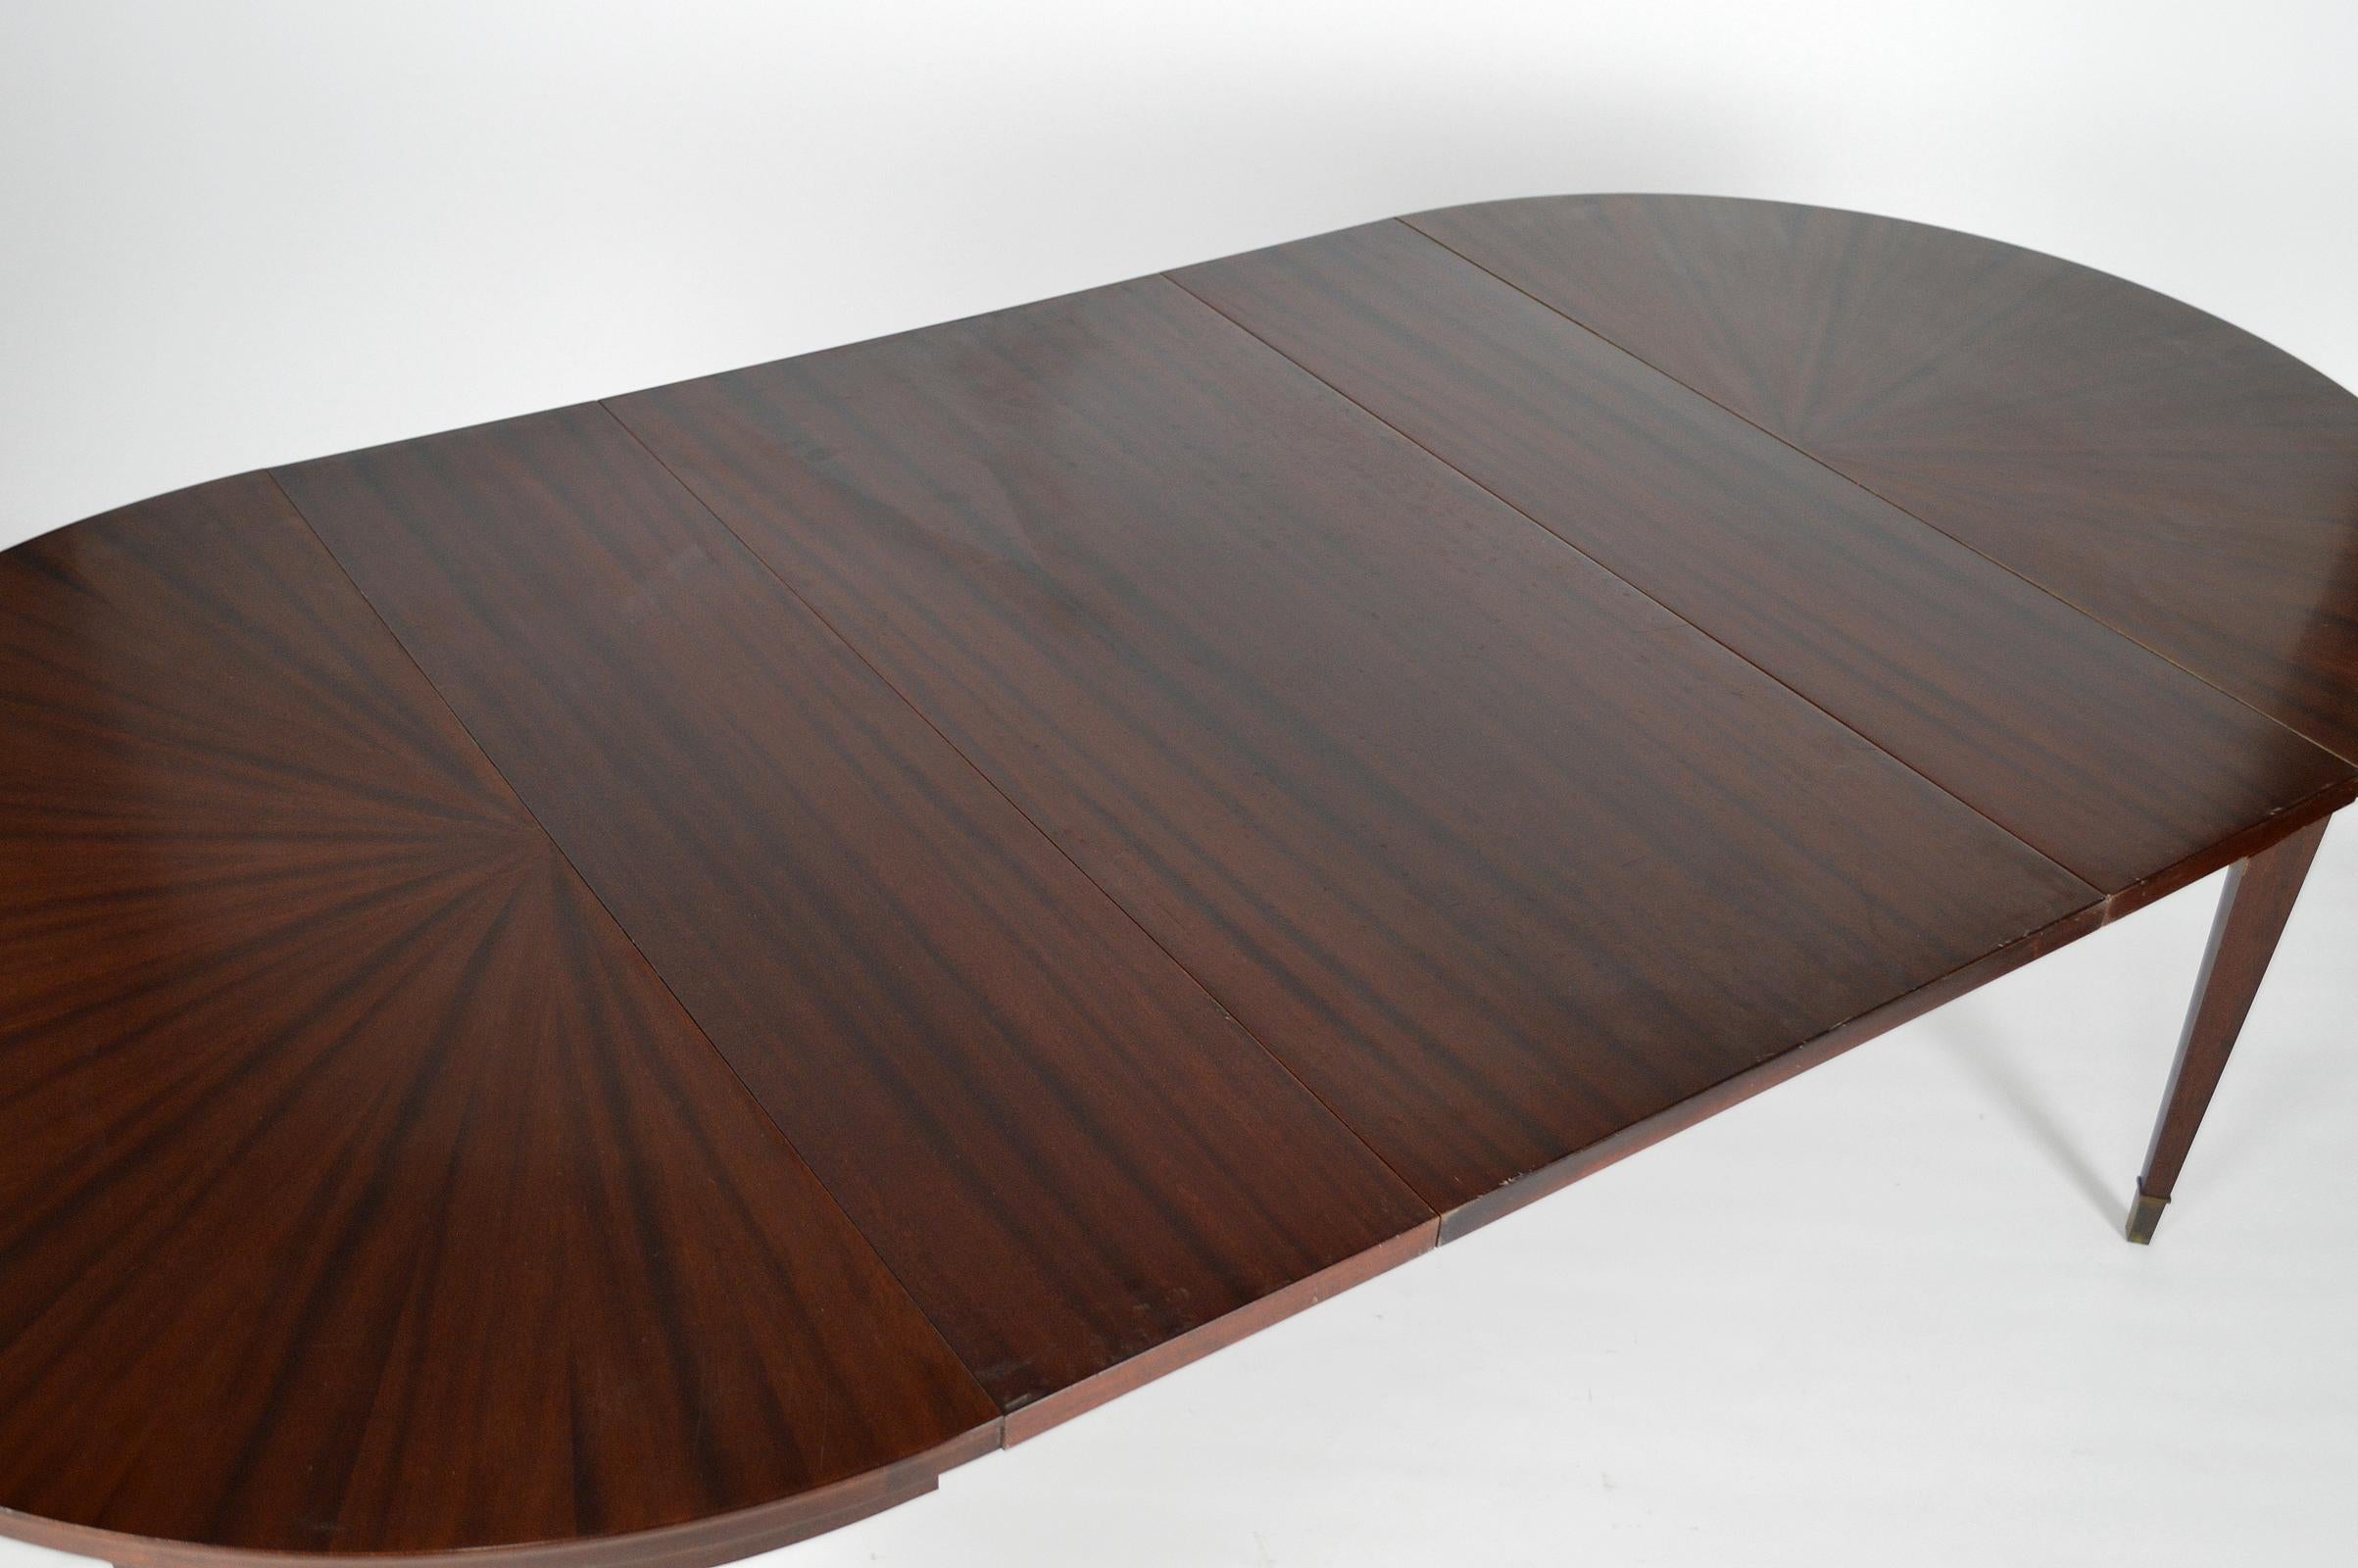 Art Deco Mahogany Round Table with Extensions, by Jacques Adnet, circa 1940 For Sale 8